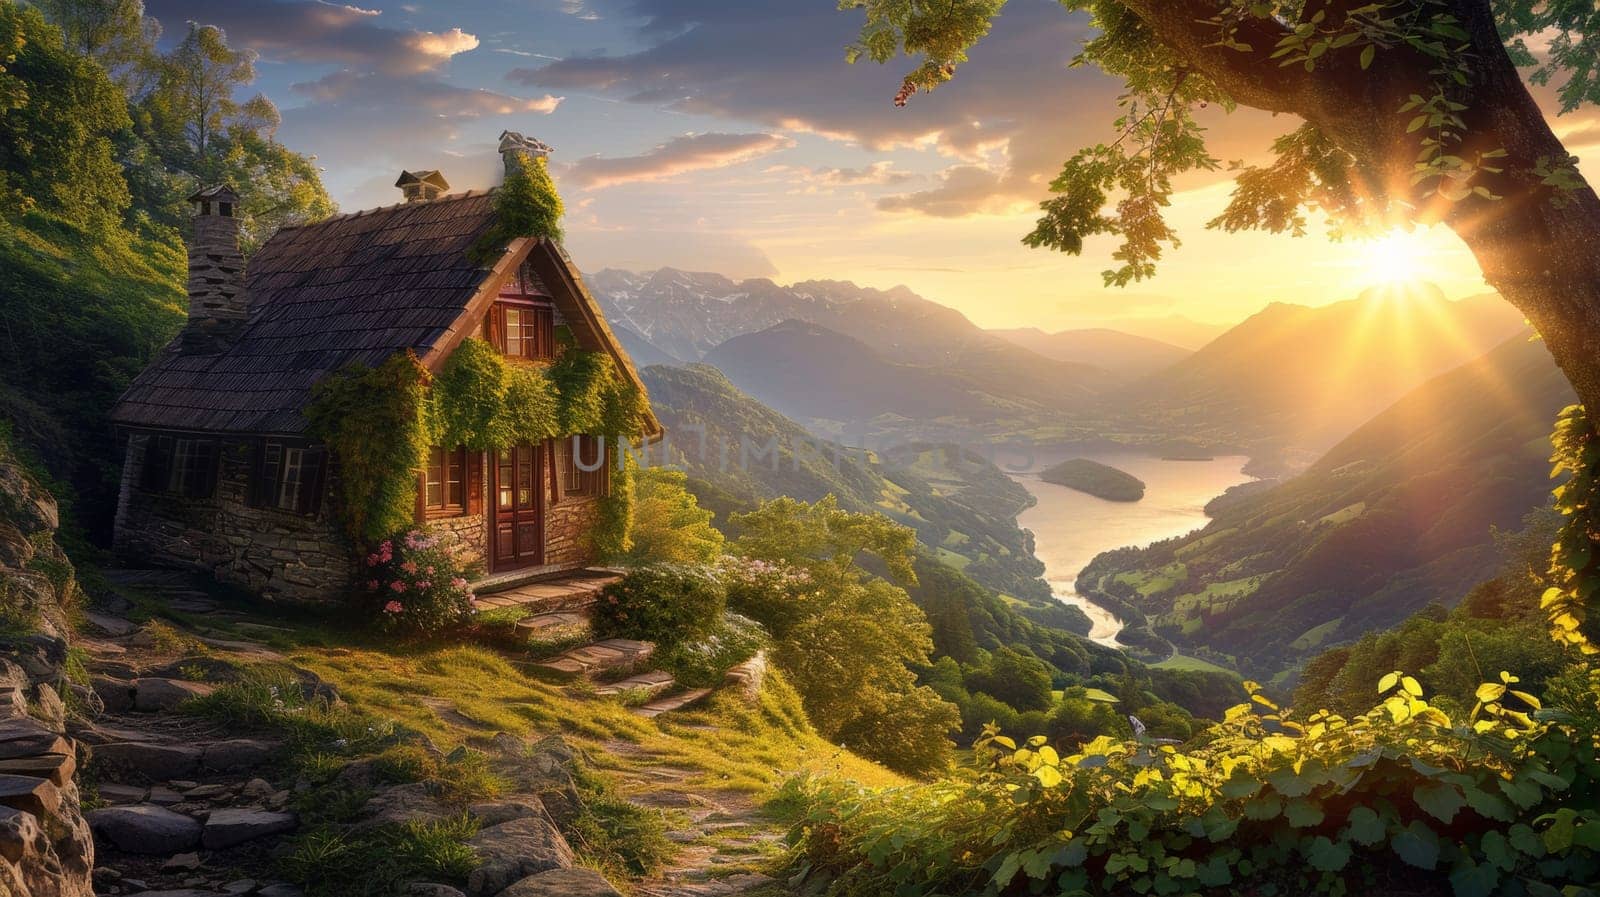 A small house on a hill overlooking the water and mountains